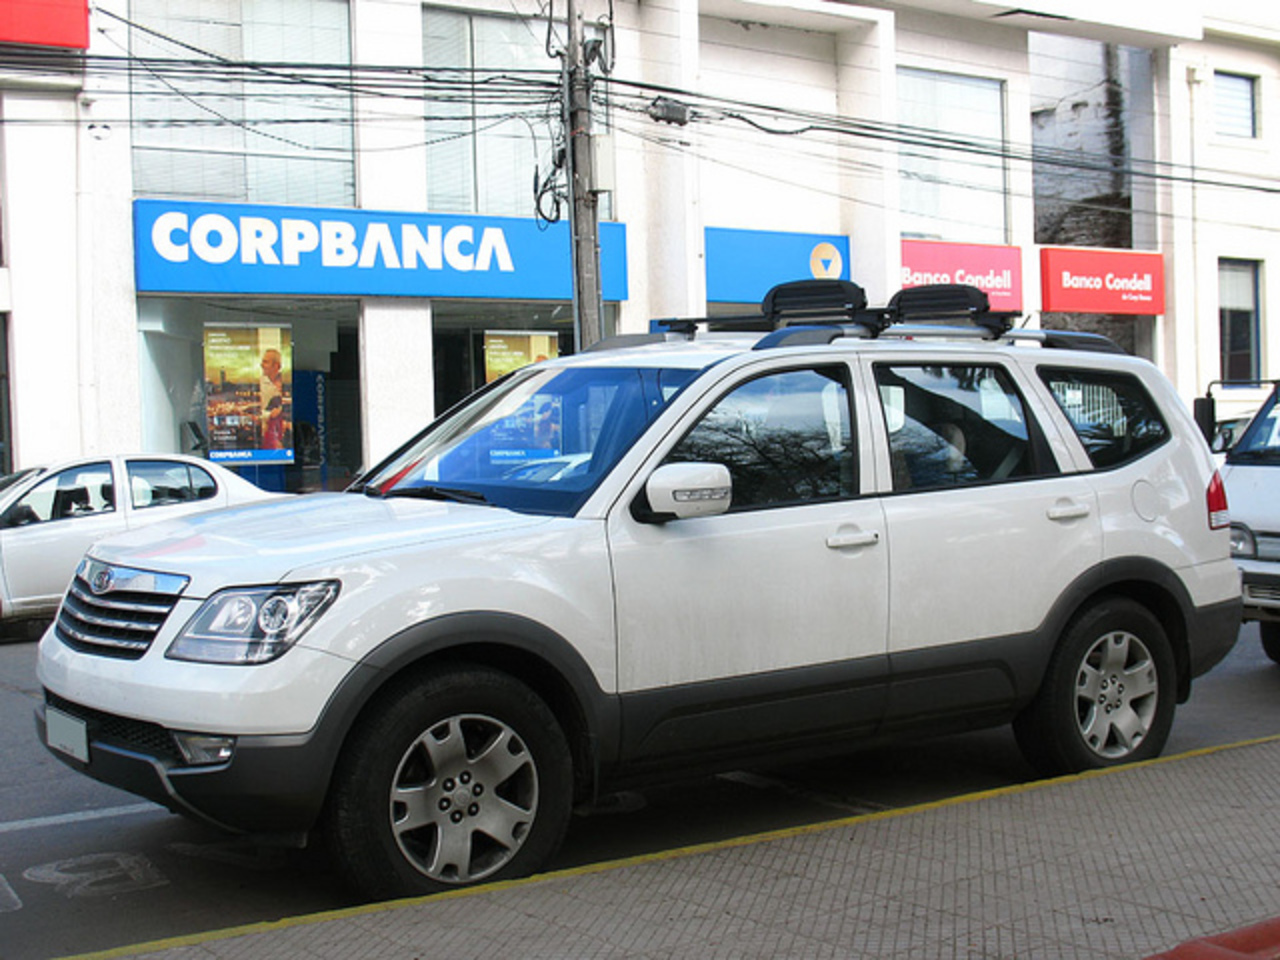 Kia Mohave EX 2010 | Flickr - Photo Sharing!